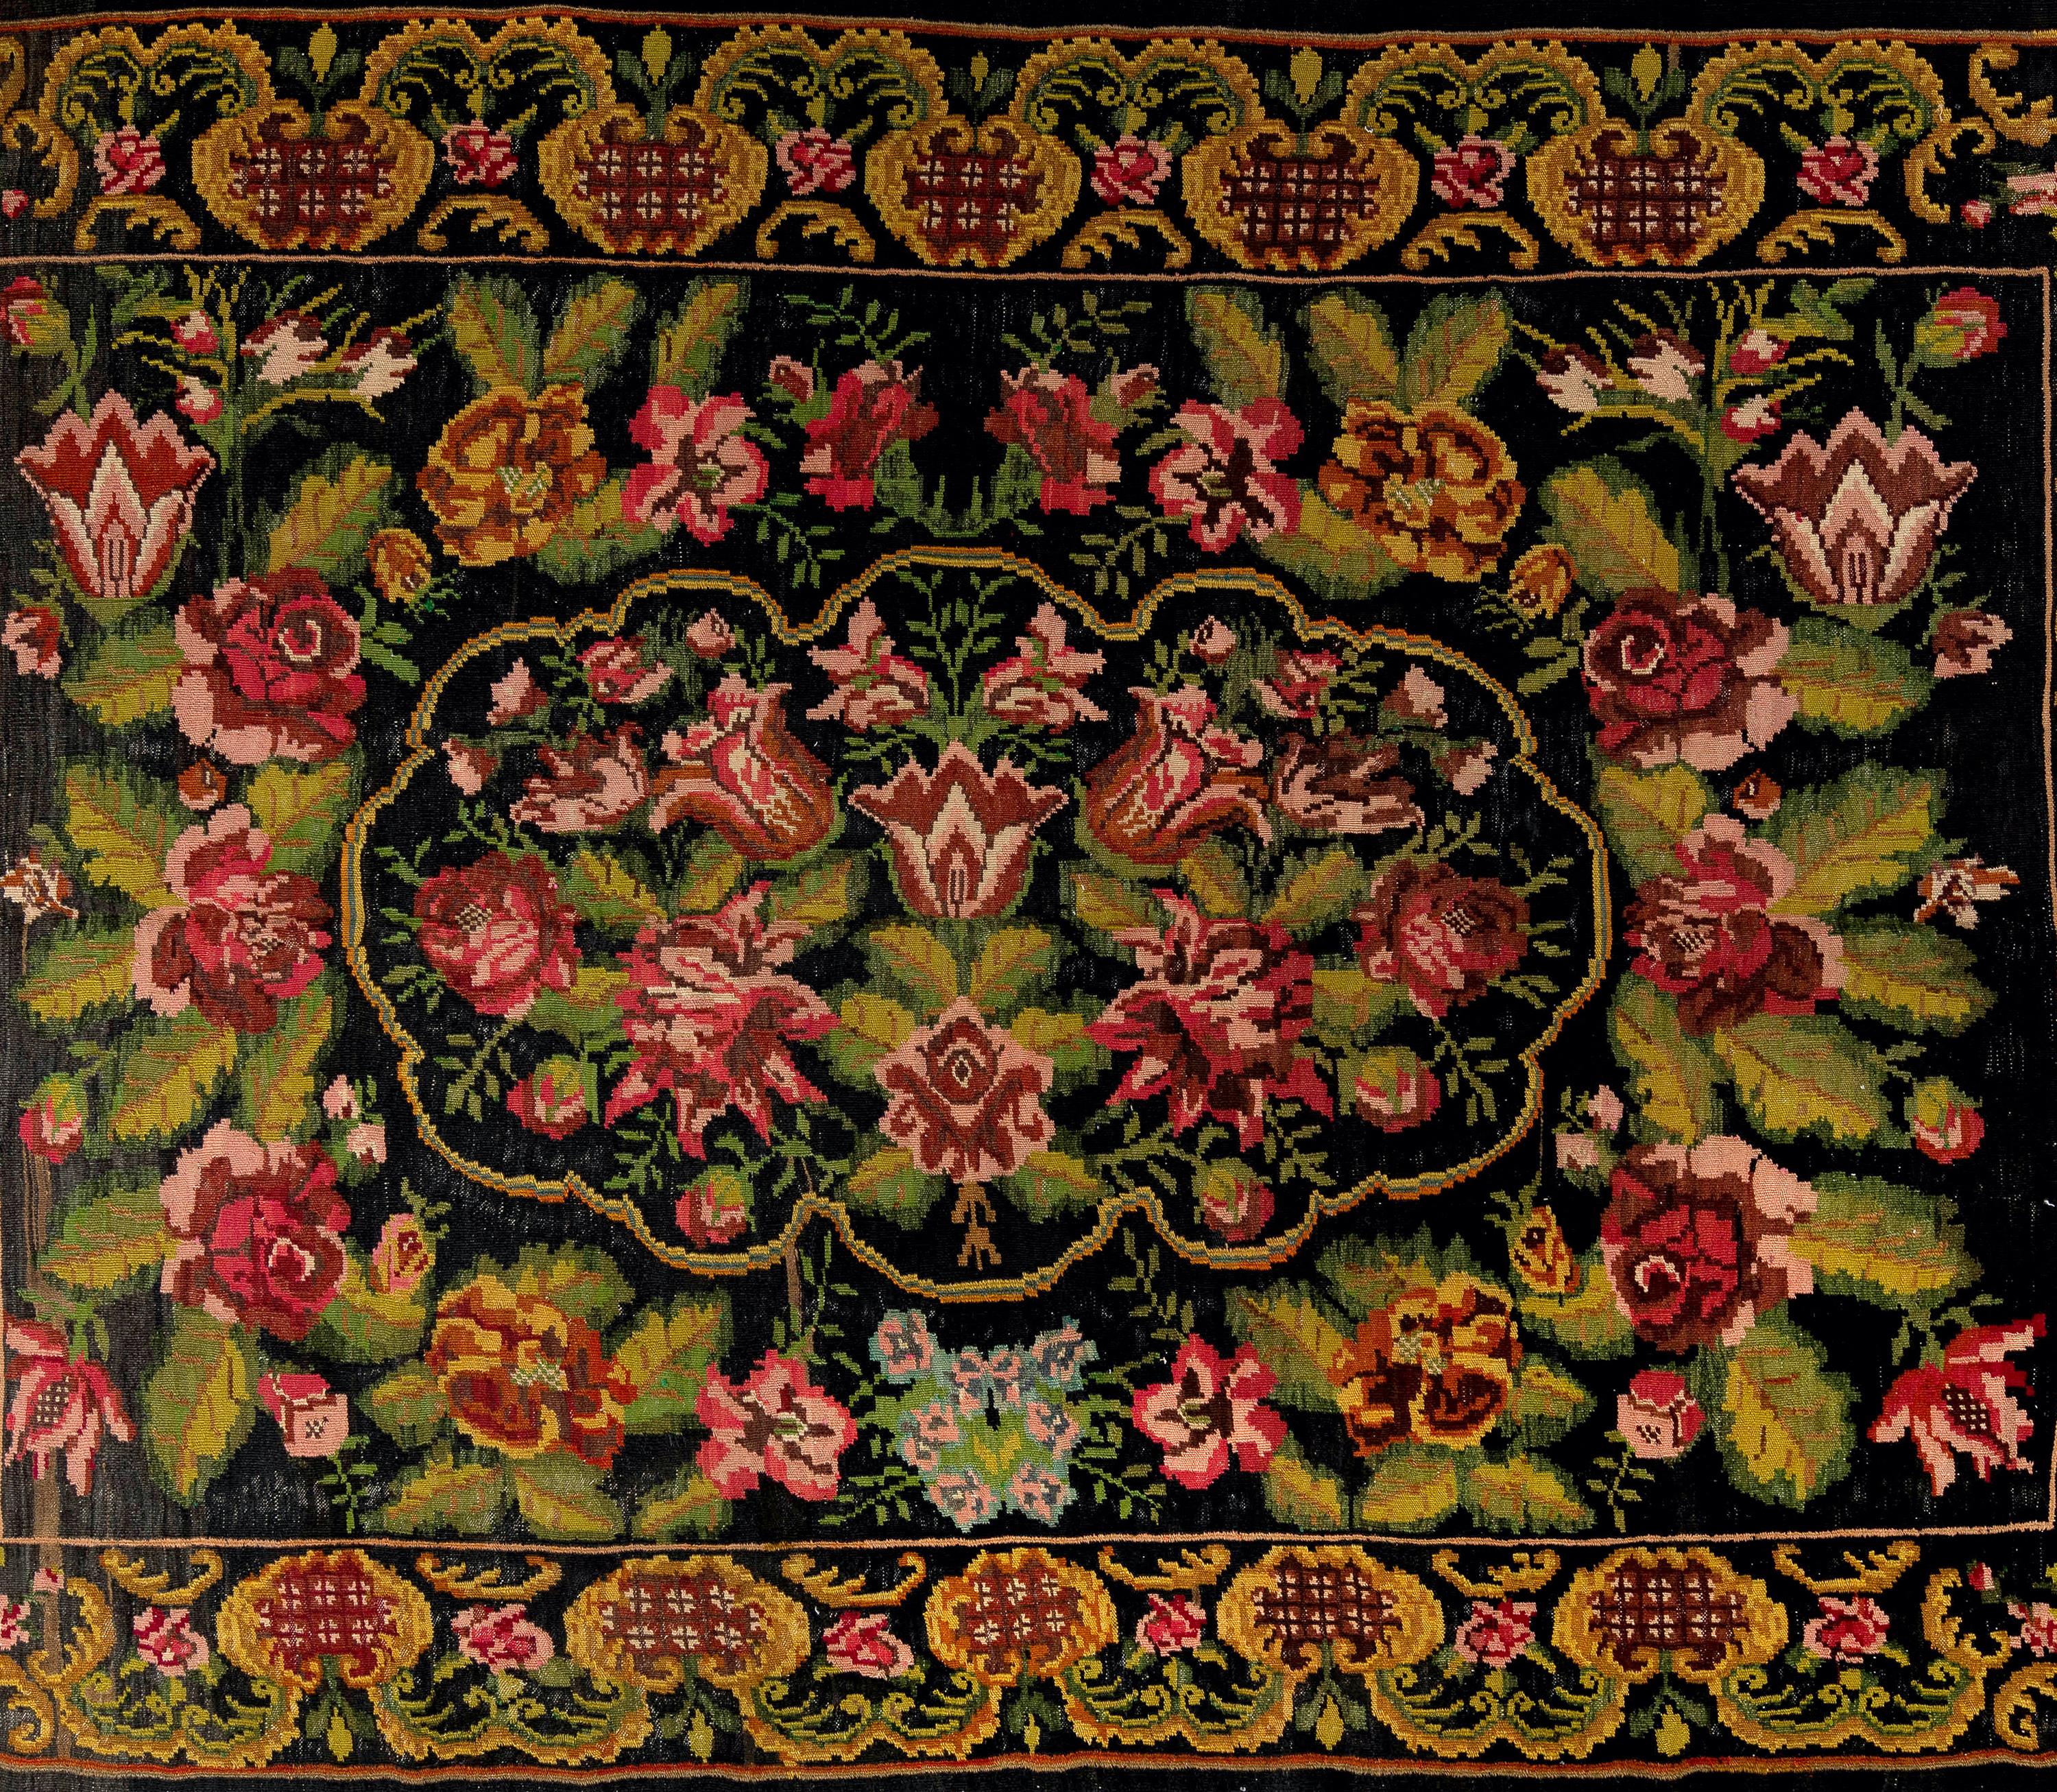 One of a kind Vintage Bessarabian Kilim. 
A hand-woven Eastern European Rug from Moldova. These traditional Moldovan flat-weaves are inspired from vintage Aubusson carpets but they are distinguished with their black grounds, large floral patterns